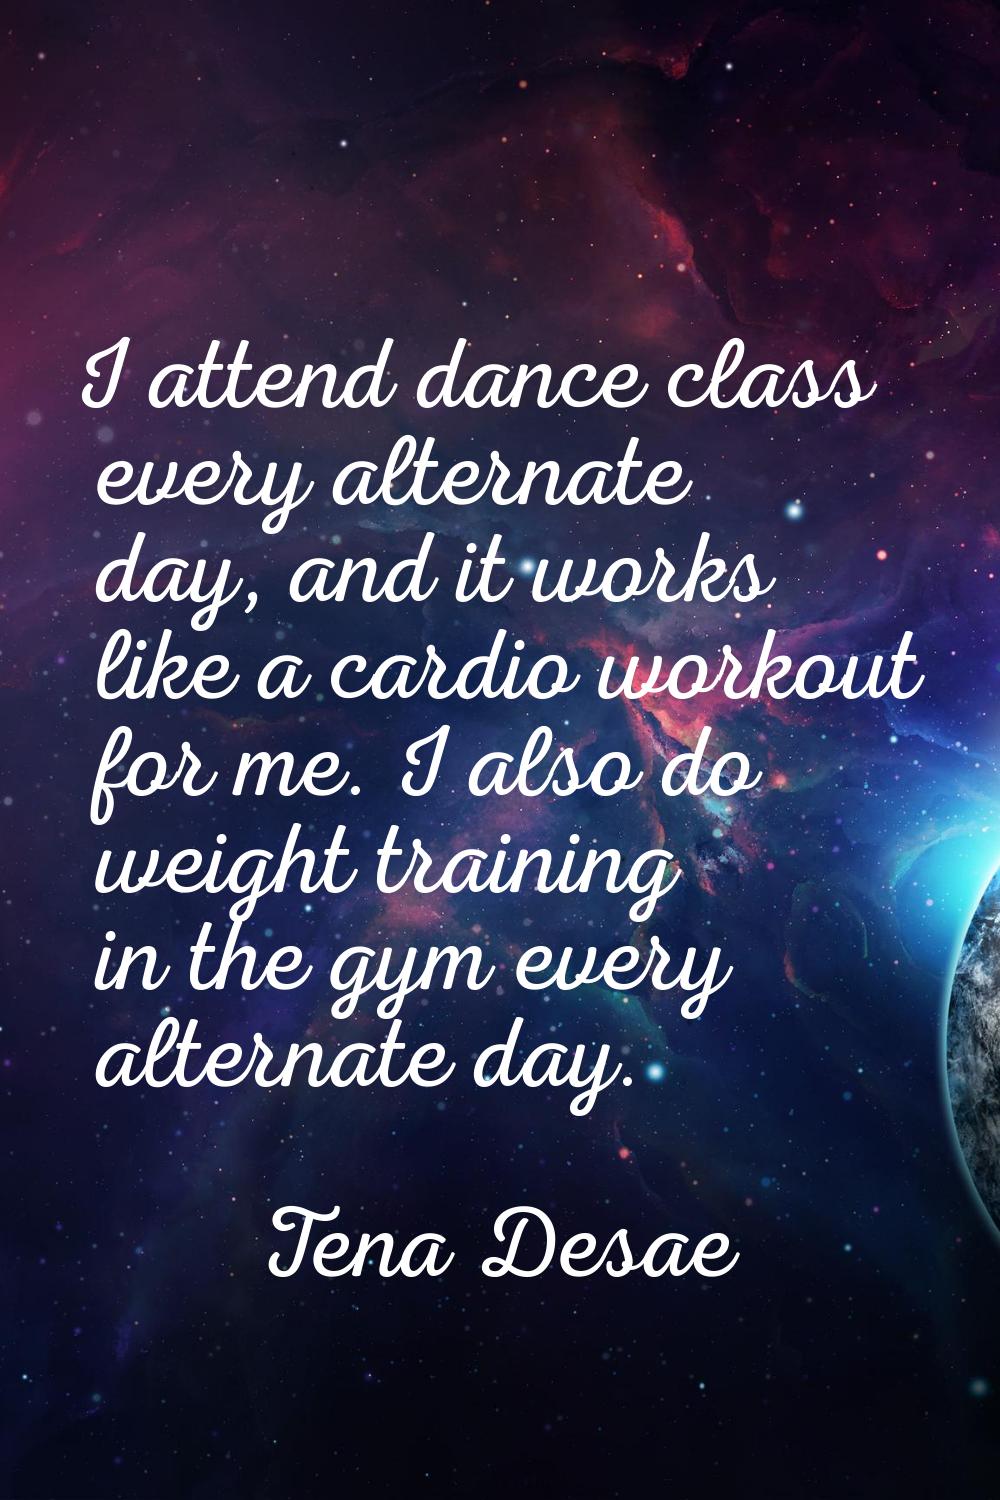 I attend dance class every alternate day, and it works like a cardio workout for me. I also do weig